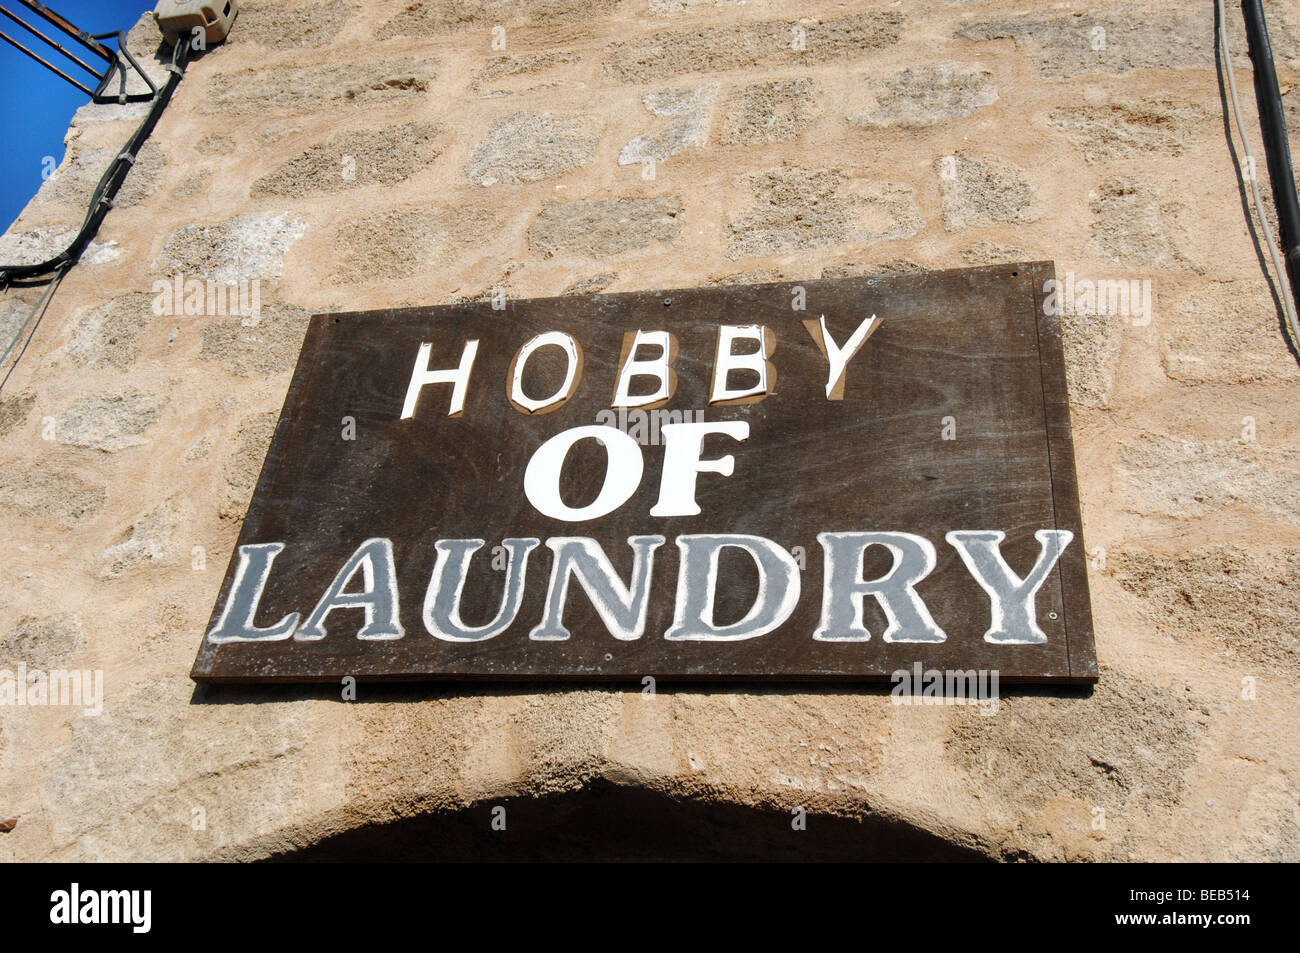 Sign hanging outside a laundry in the old city in Rhodos, Rhodes, Greece Stock Photo